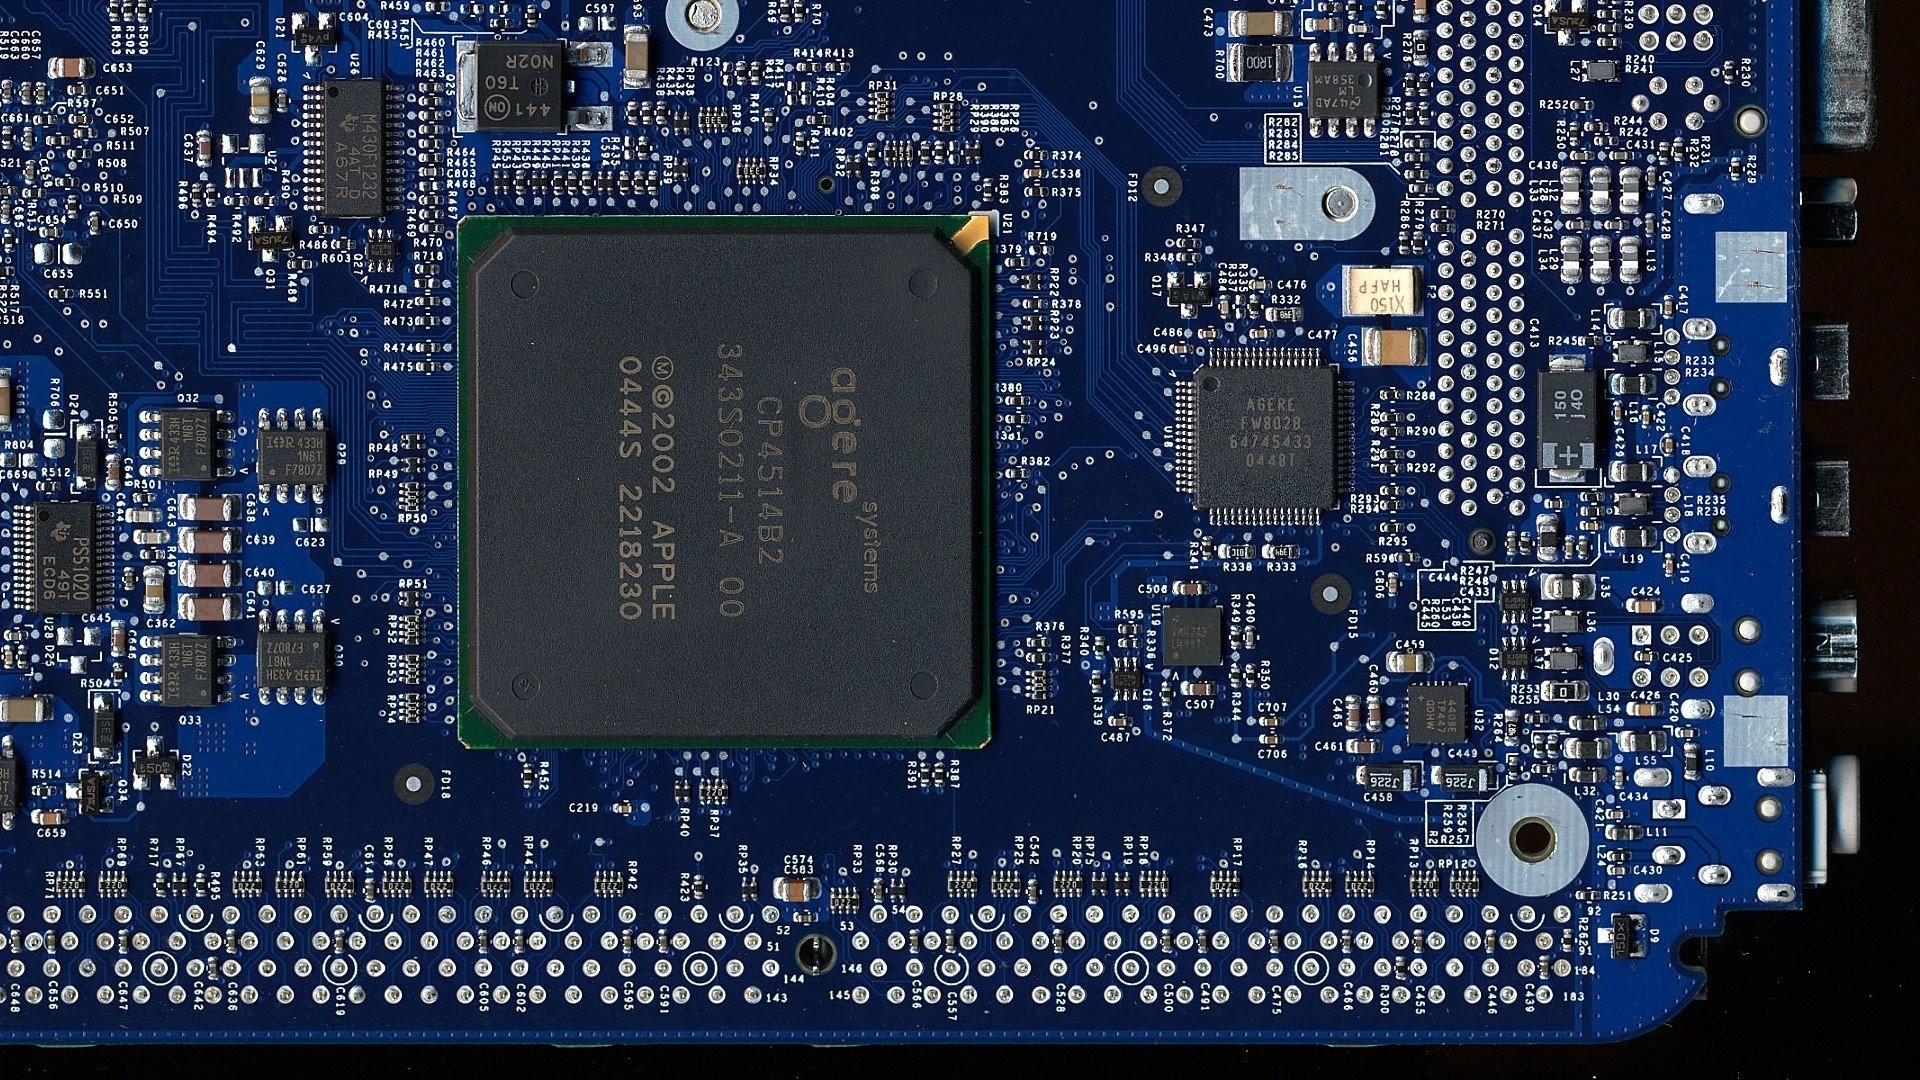 1920x1080 Motherboard Wallpapers - Motherboard Live Images, HD Wallpapers .